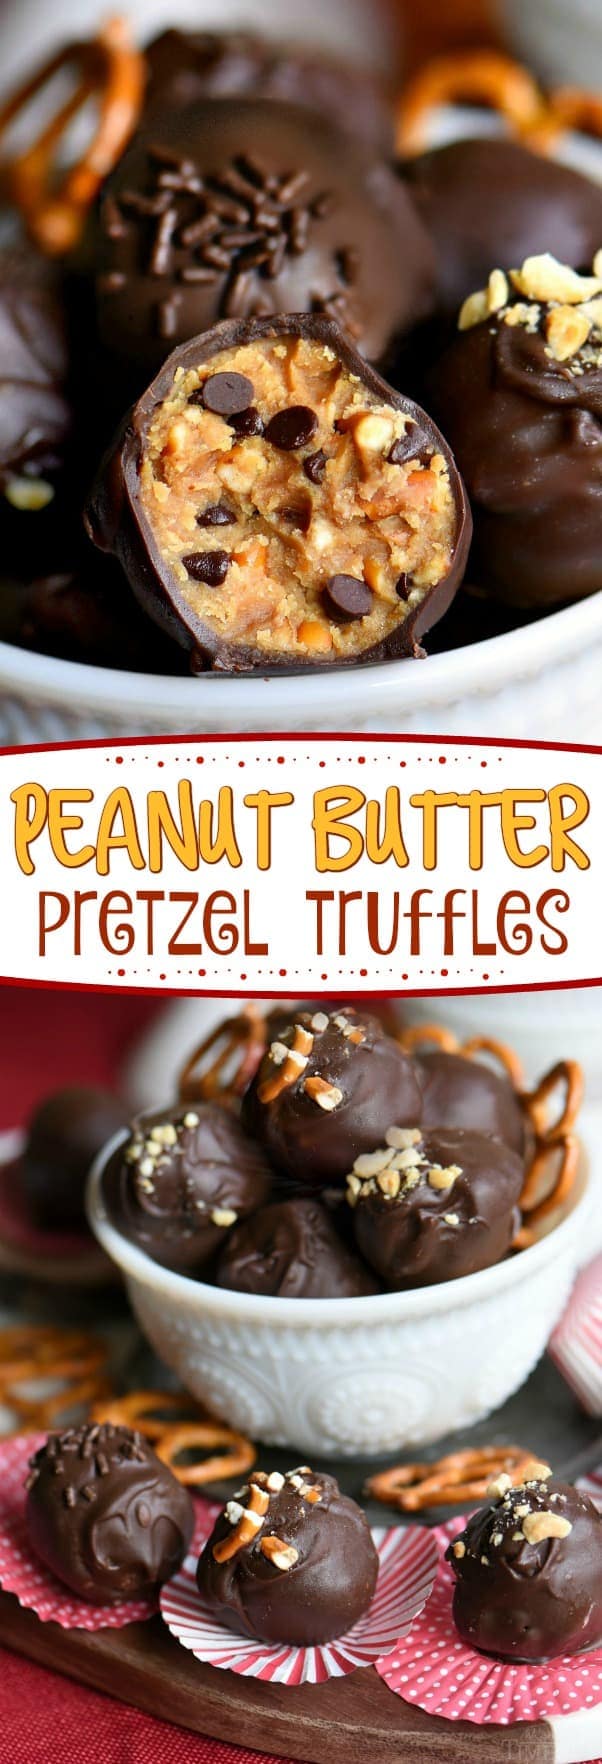 It's not a party without these easy Peanut Butter Pretzel Truffles! Extra creamy and delicious and loaded with peanut butter, chocolate chips, and pretzels! The ultimate sweet and salty combination! // Mom On Timeout #peanutbutter #pretzel #chocolate #candy #truffle #recipe #ad @FritoLay #mingleinabox #sweepstakes